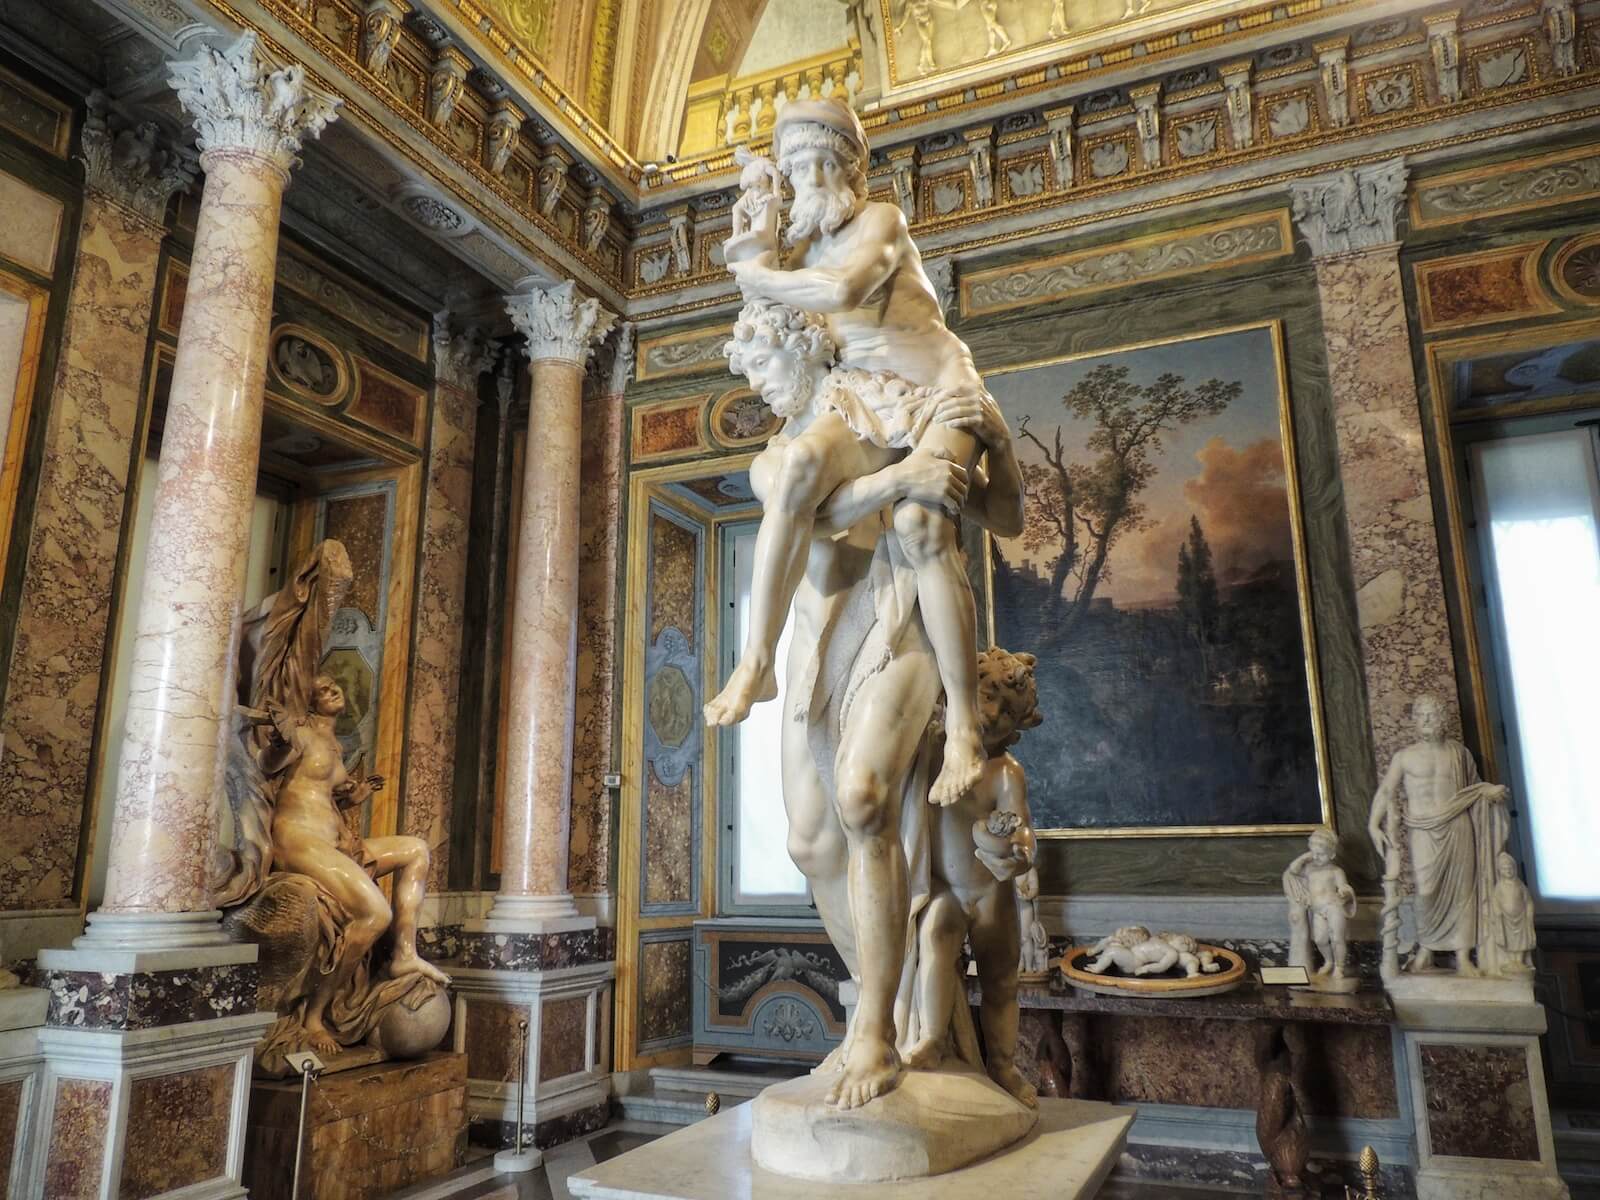 Who Is Aeneas Carrying On His Shoulders In Bernini’s Sculpture?